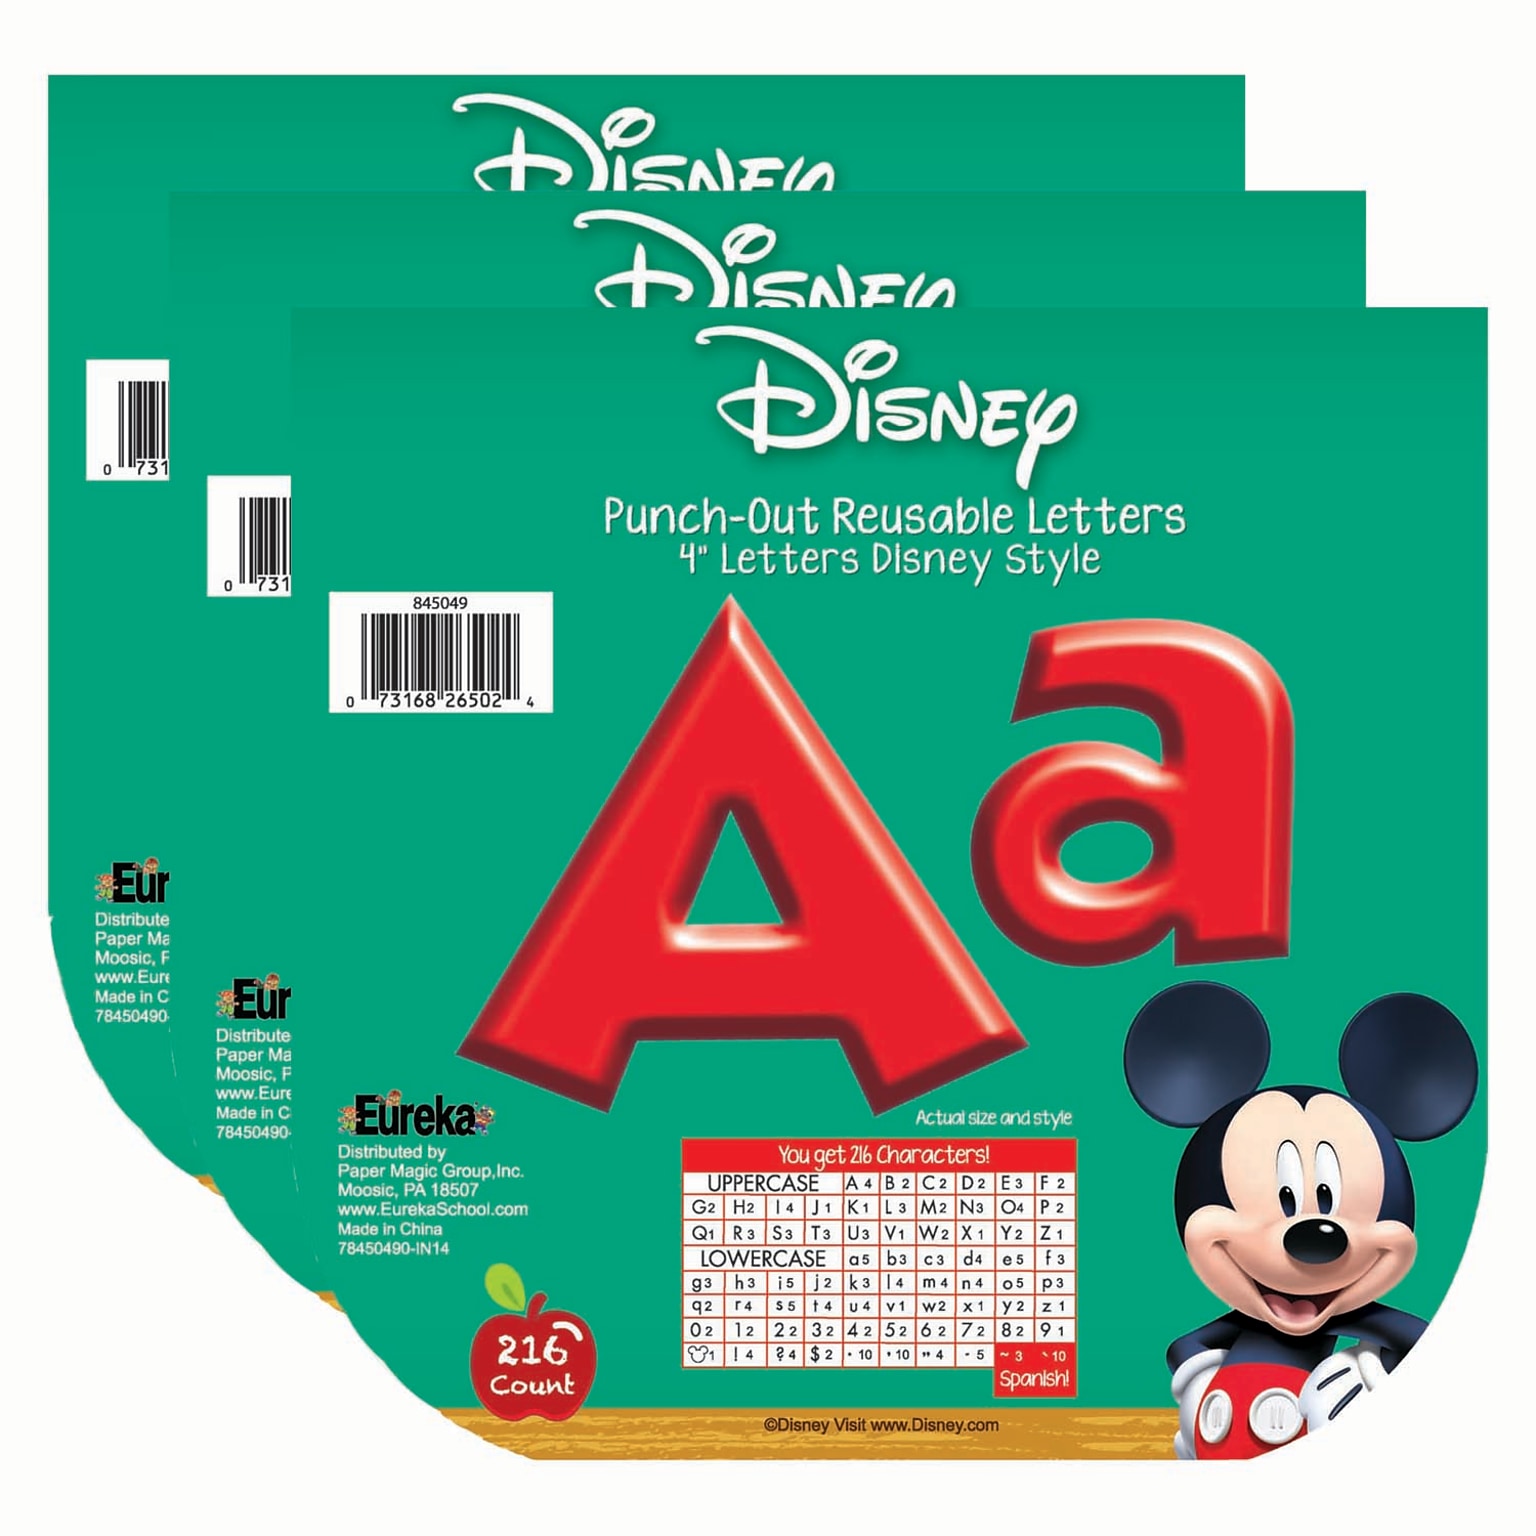 Eureka Mickey Mouse Clubhouse 4 Reusable Punch Out Deco Letters, Red, 216/Pack, 3 Packs (EU-845049-3)